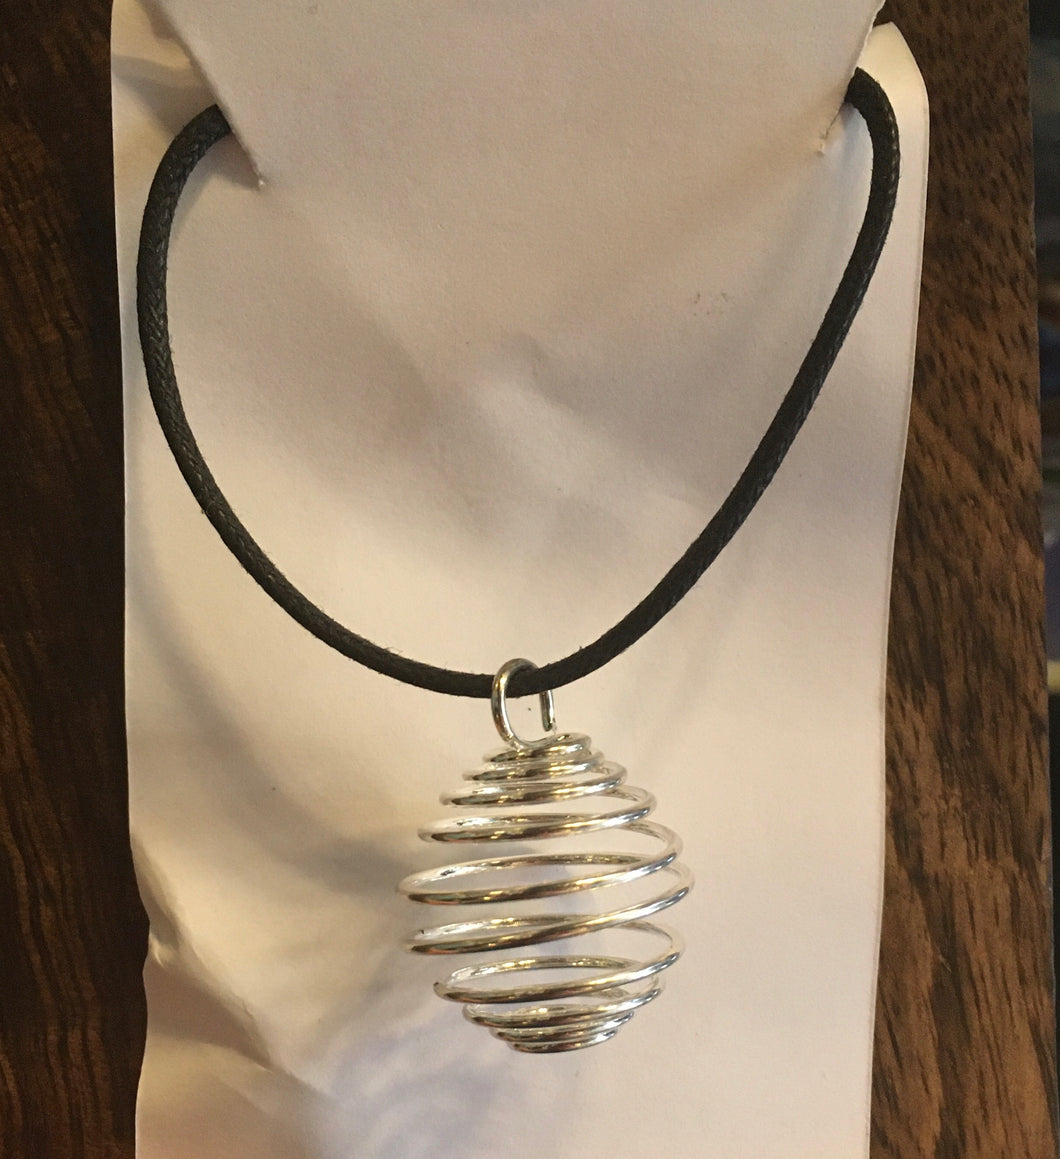 Spiral cage with black cord